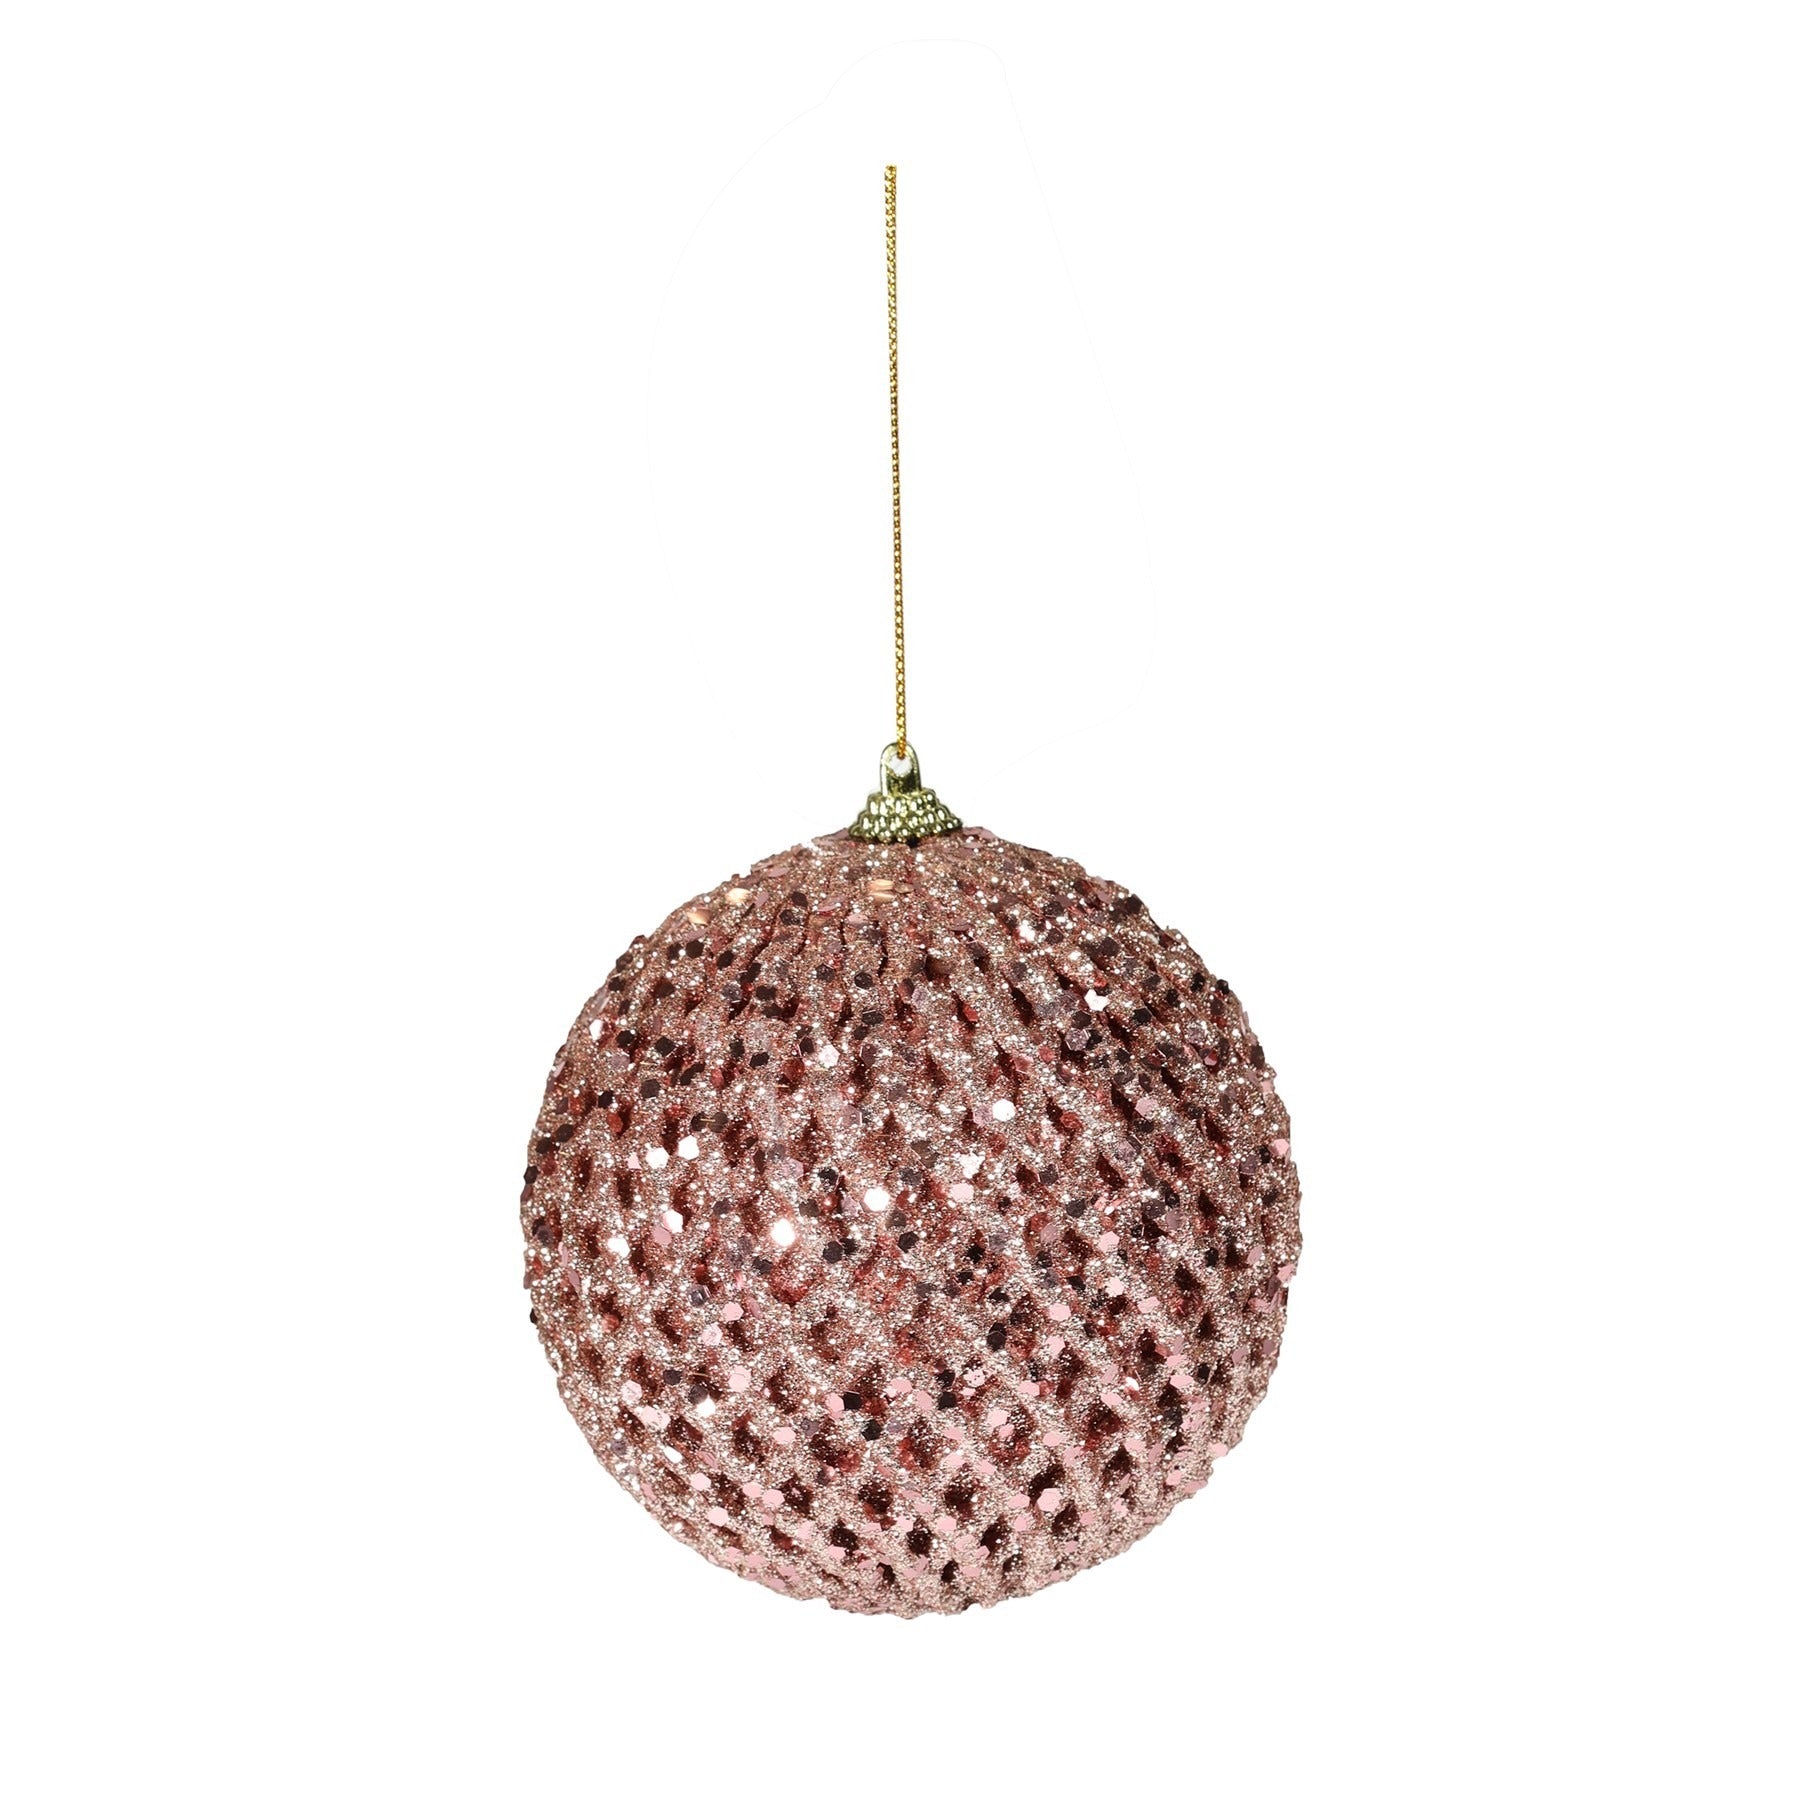 View Pretty in Pink Rose Gold Glitter Bauble Dia10cm information